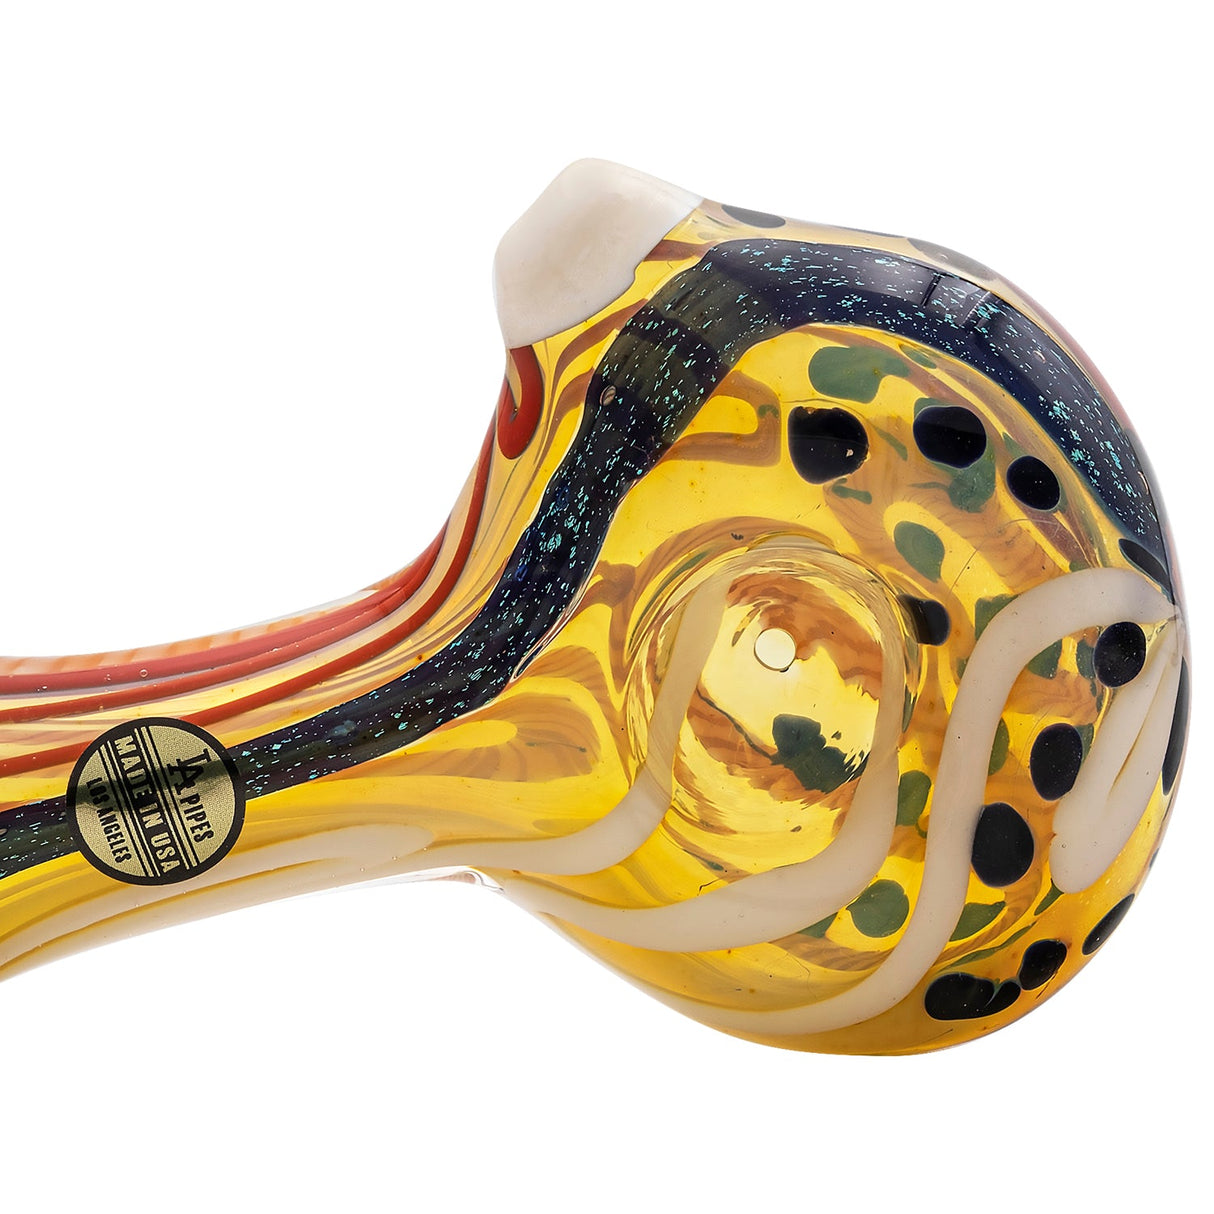 LA Pipes "Pancake" Dichroic Color-Changing Spoon Glass Pipe Side View